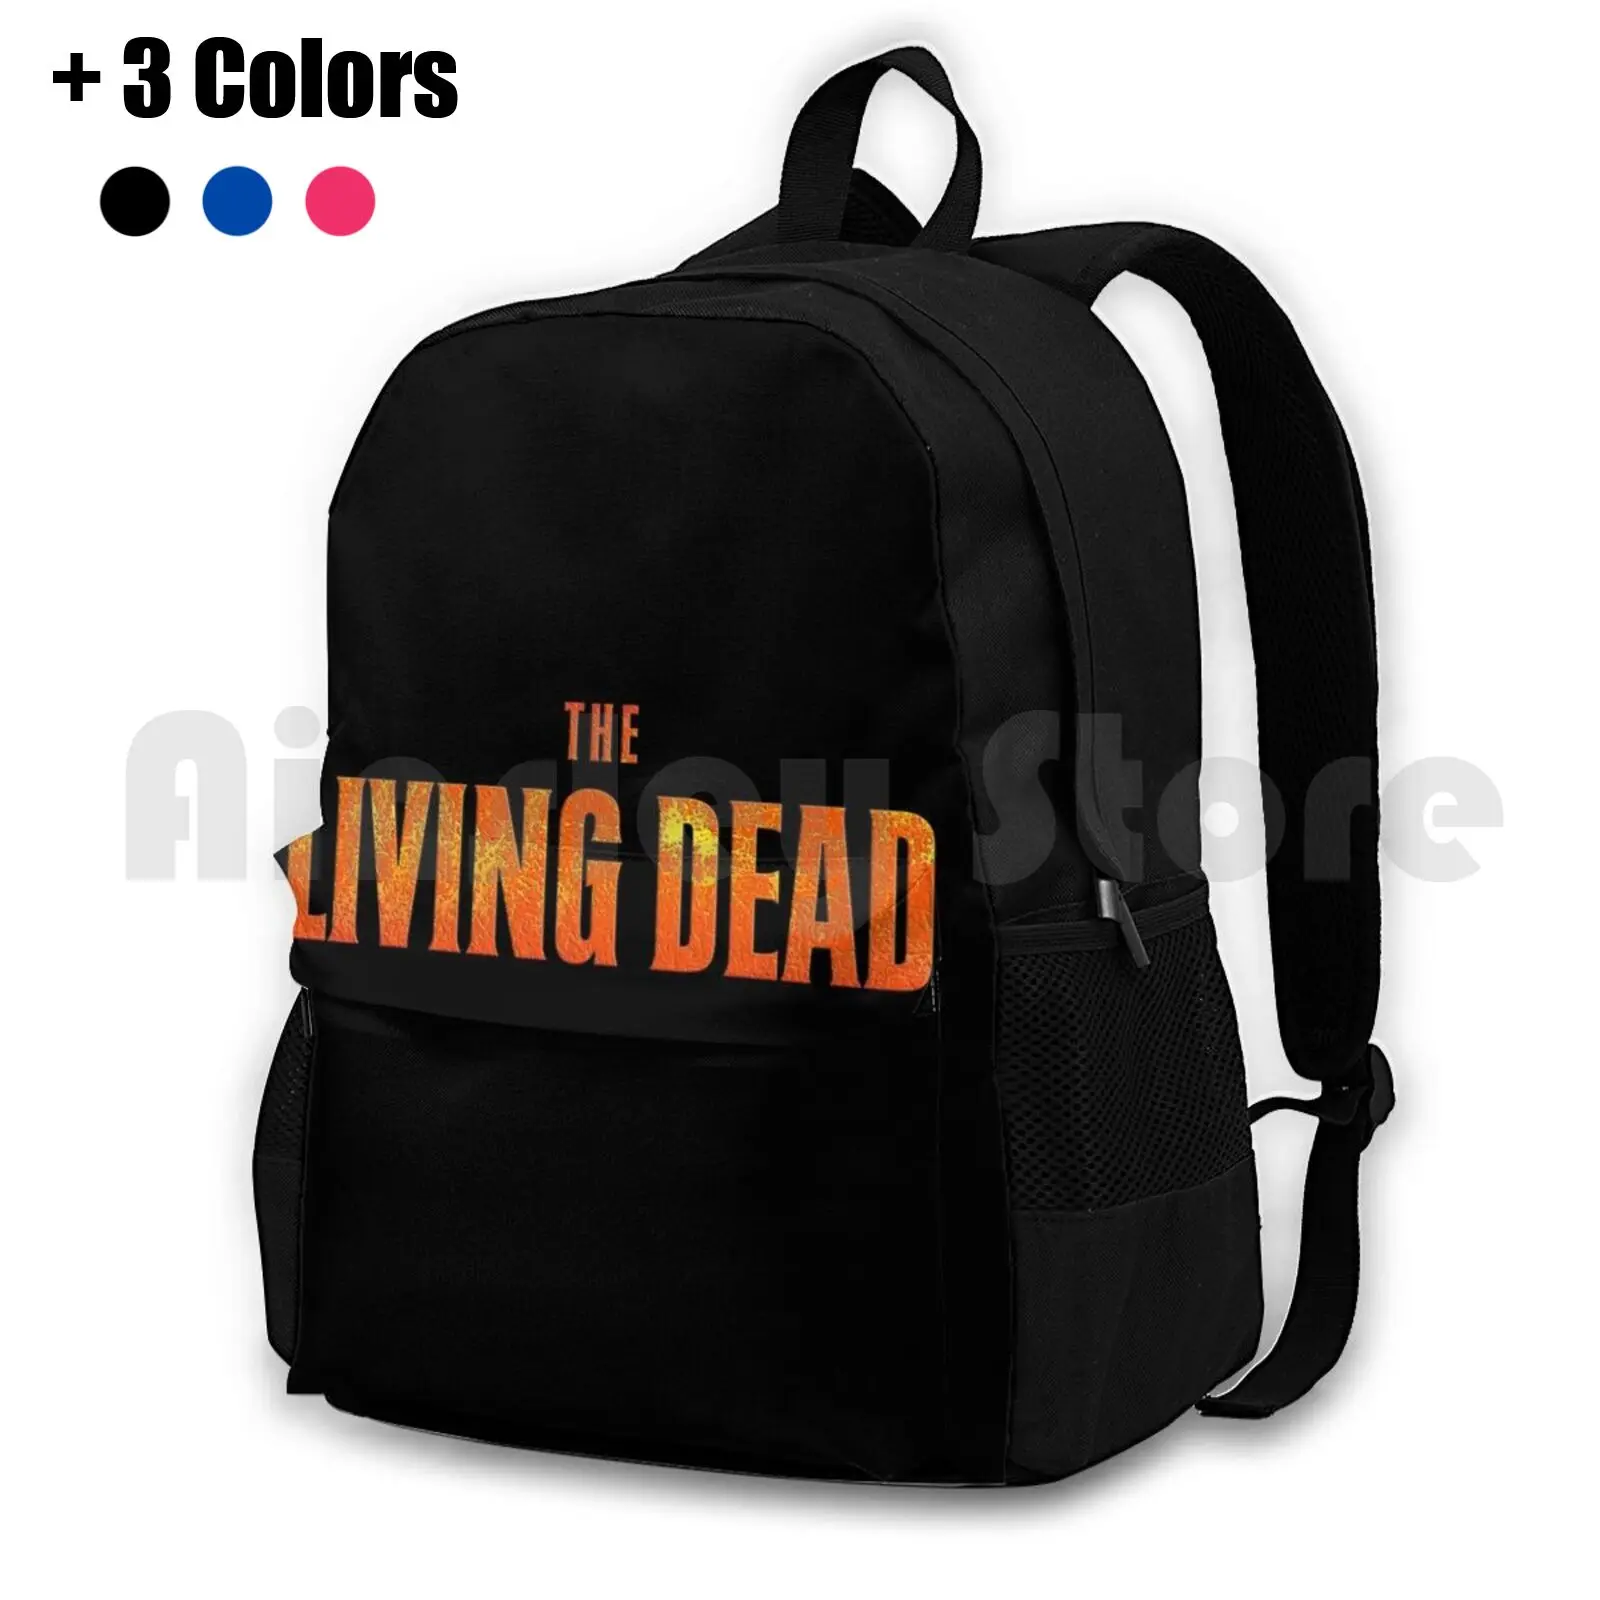 

The Living Dead Outdoor Hiking Backpack Riding Climbing Sports Bag The Living Dead Living Dead Horror Zombies Zombie Movies